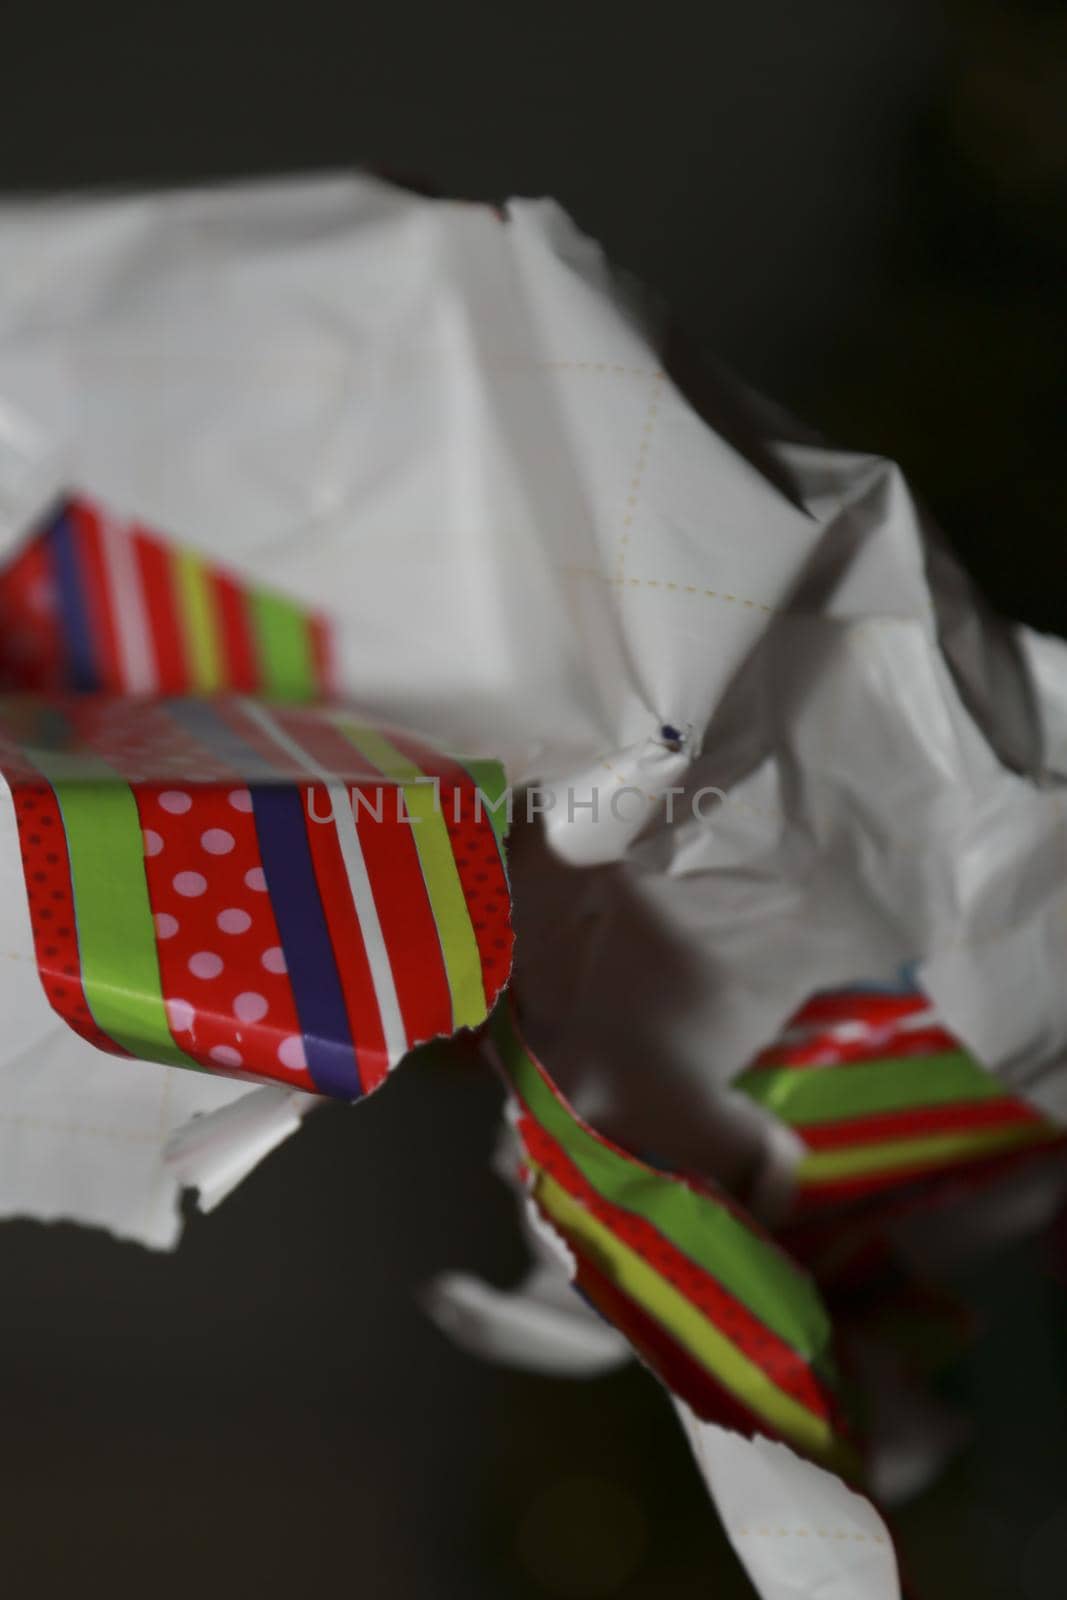 A woman ripping open a brightly colored gift